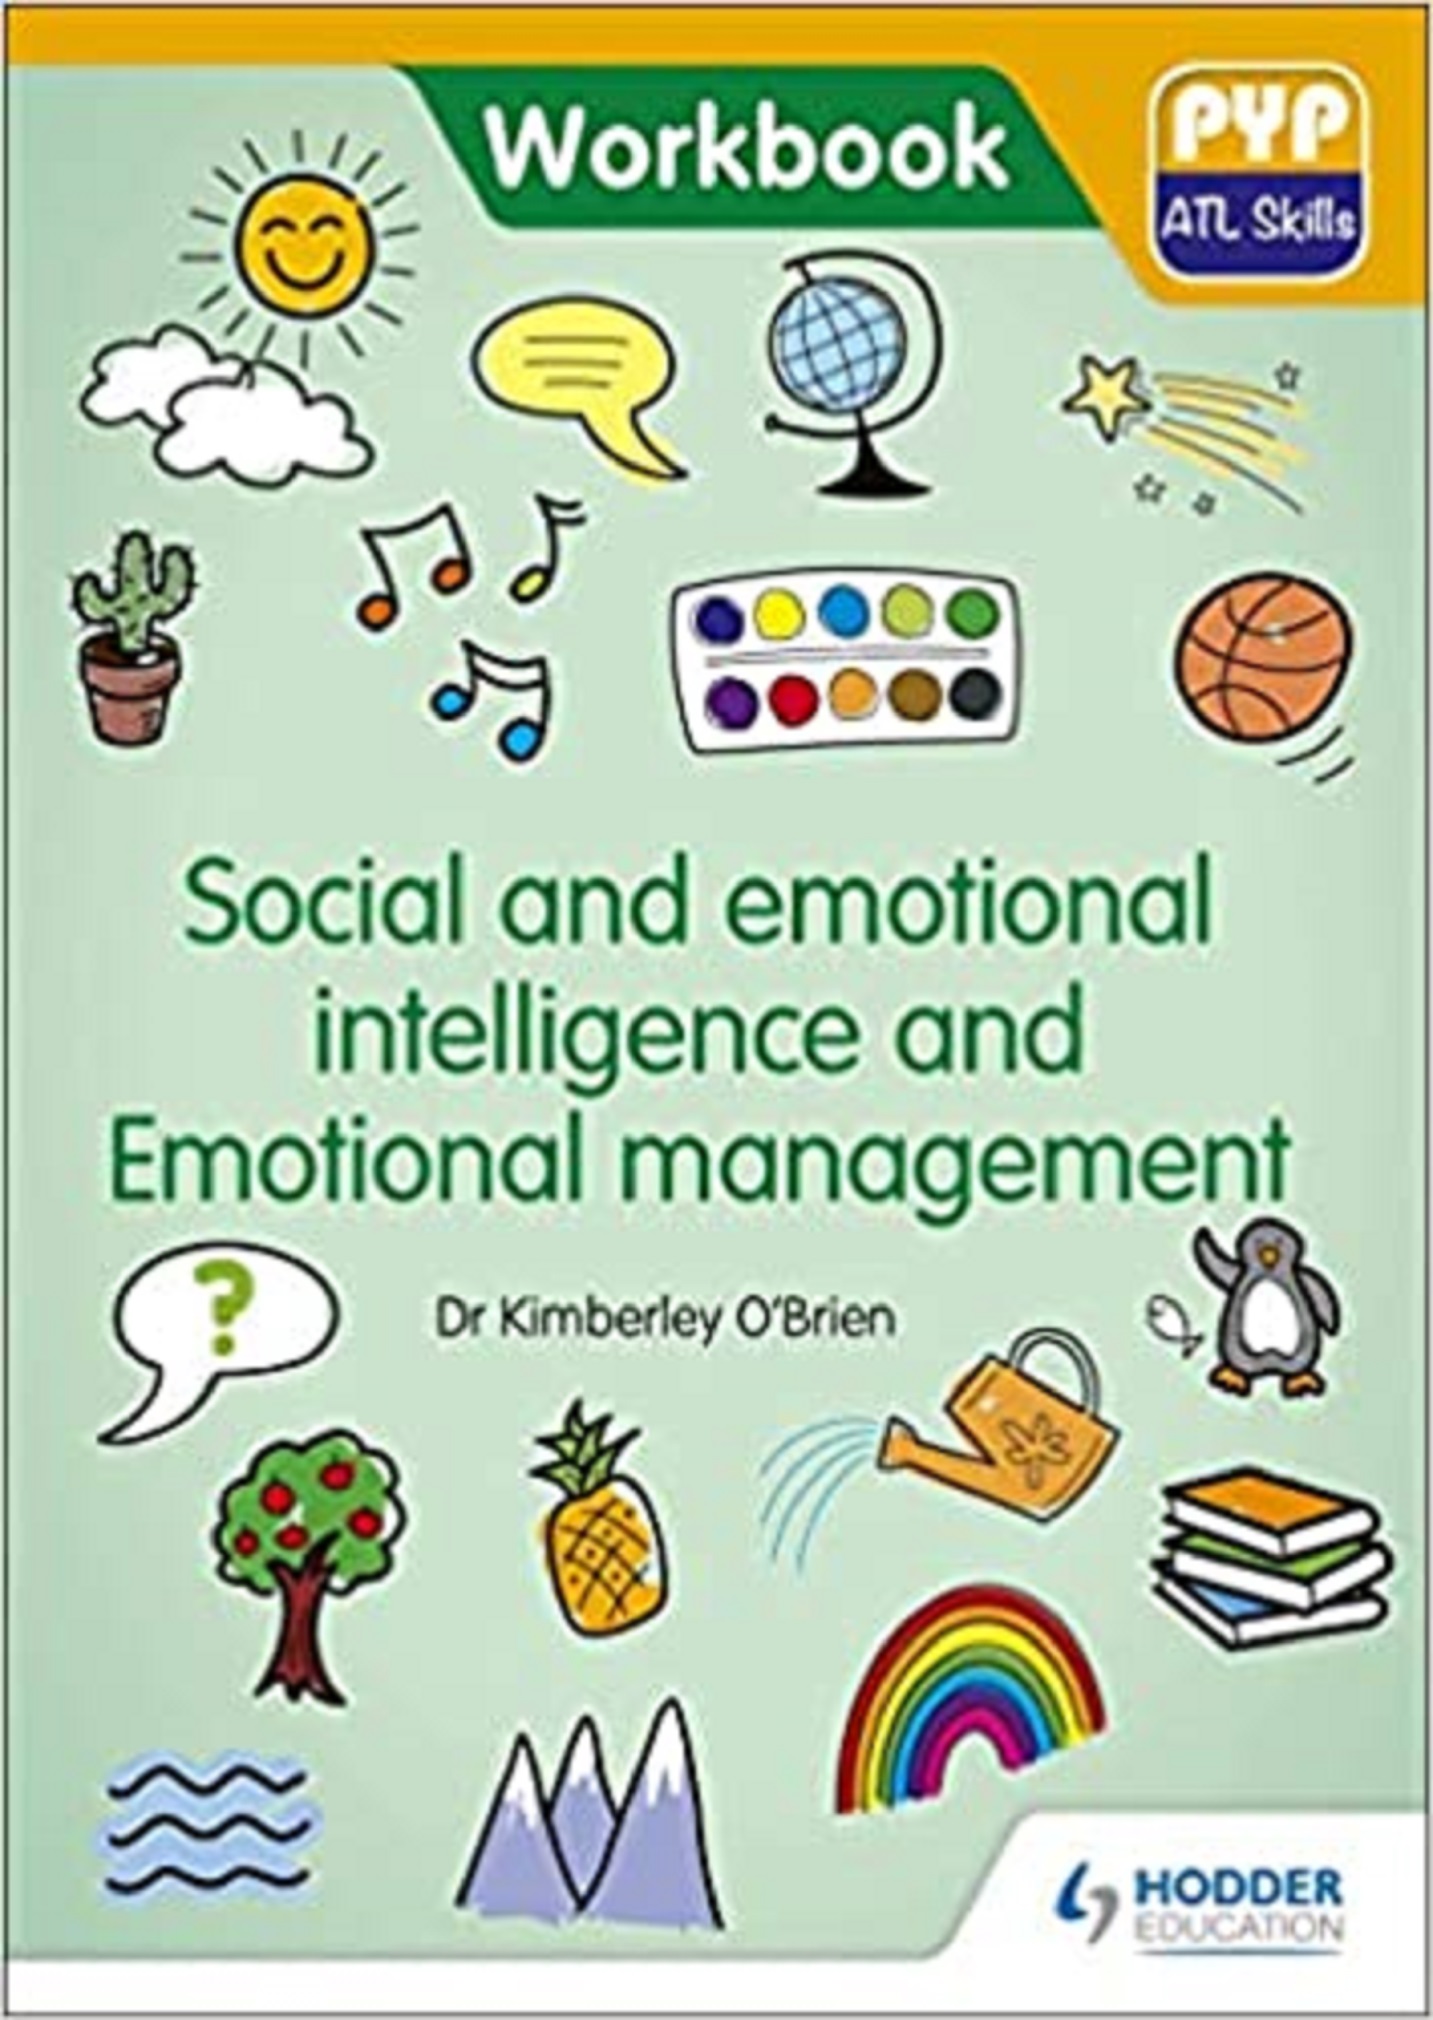 Social and emotional intelligence and Emotional management